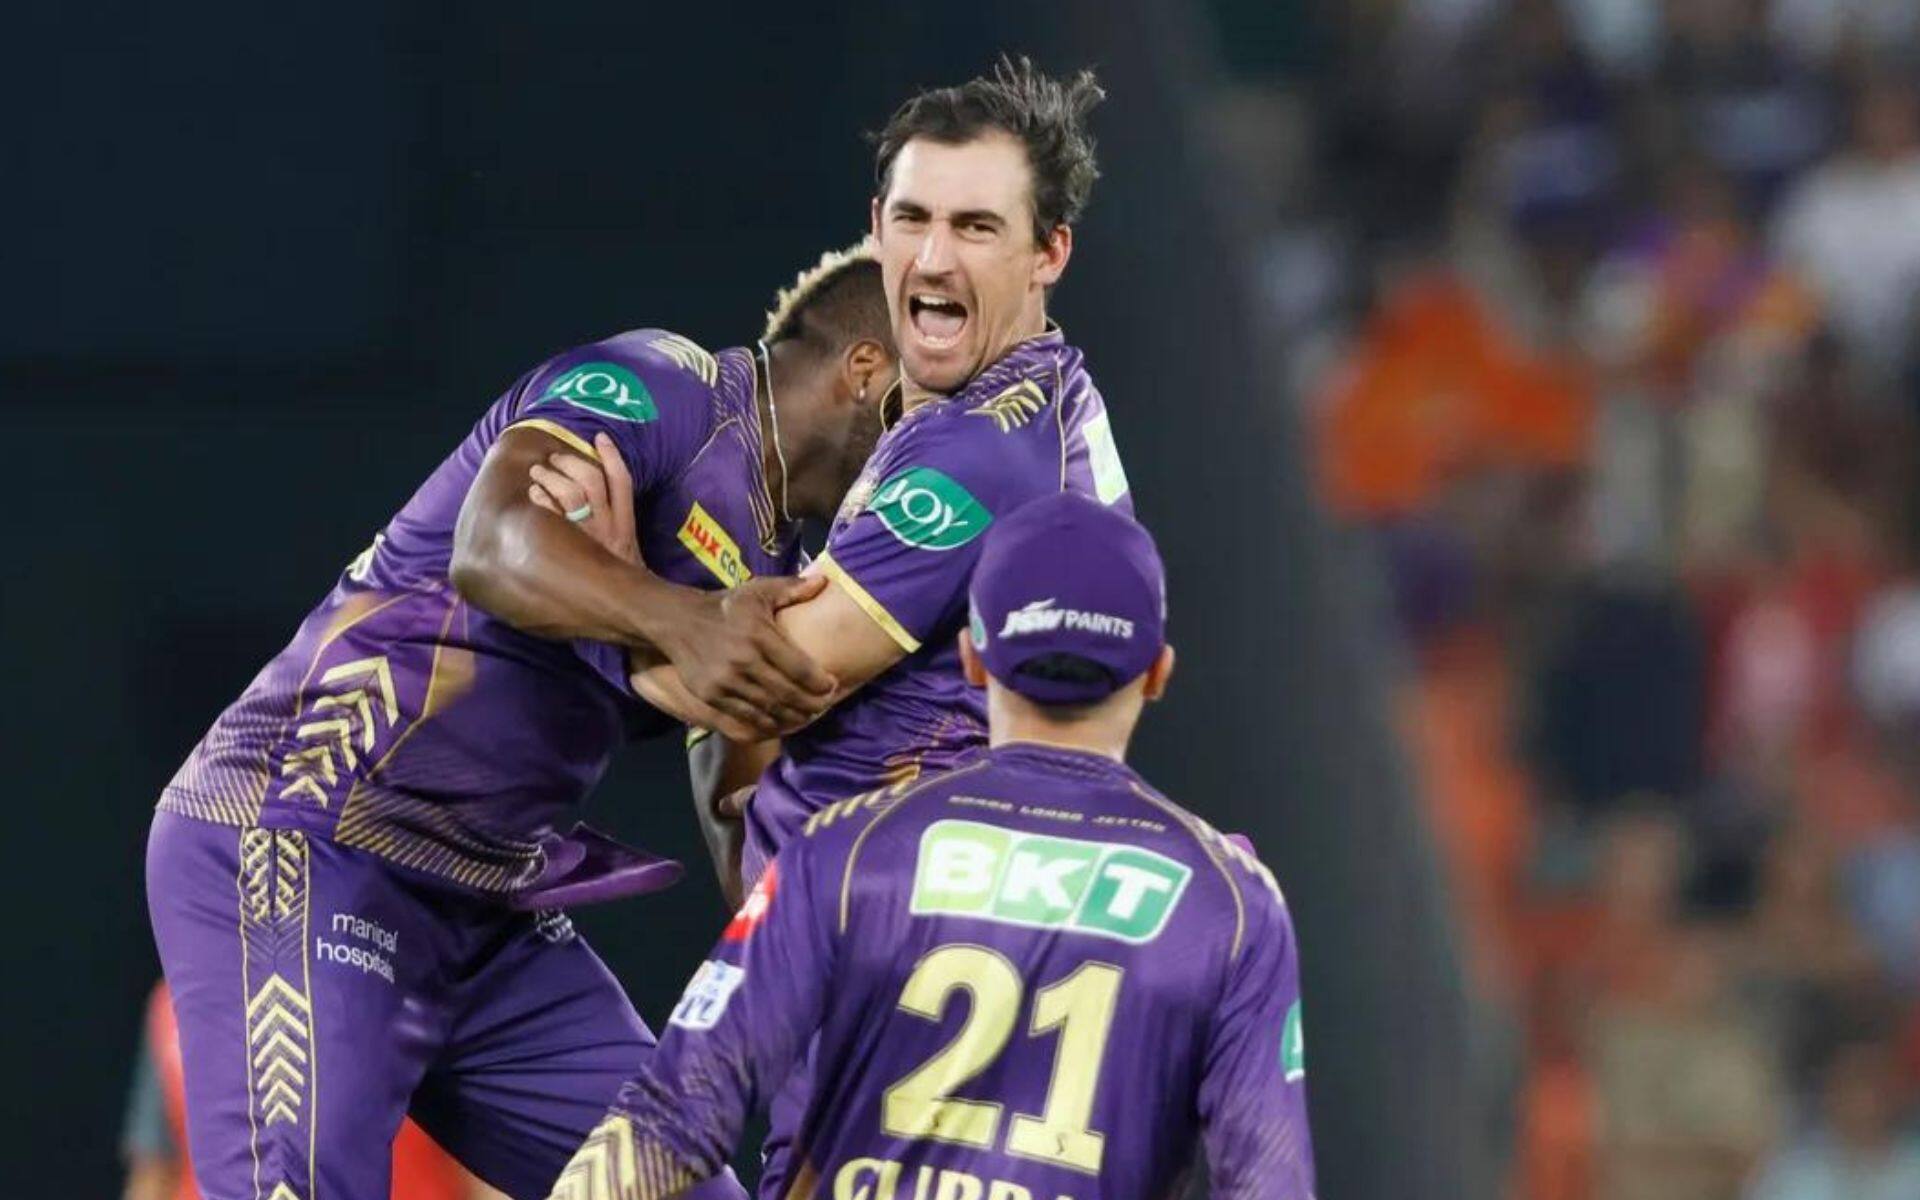 Mithcell Starc took 3 wickets against SRH [AP]